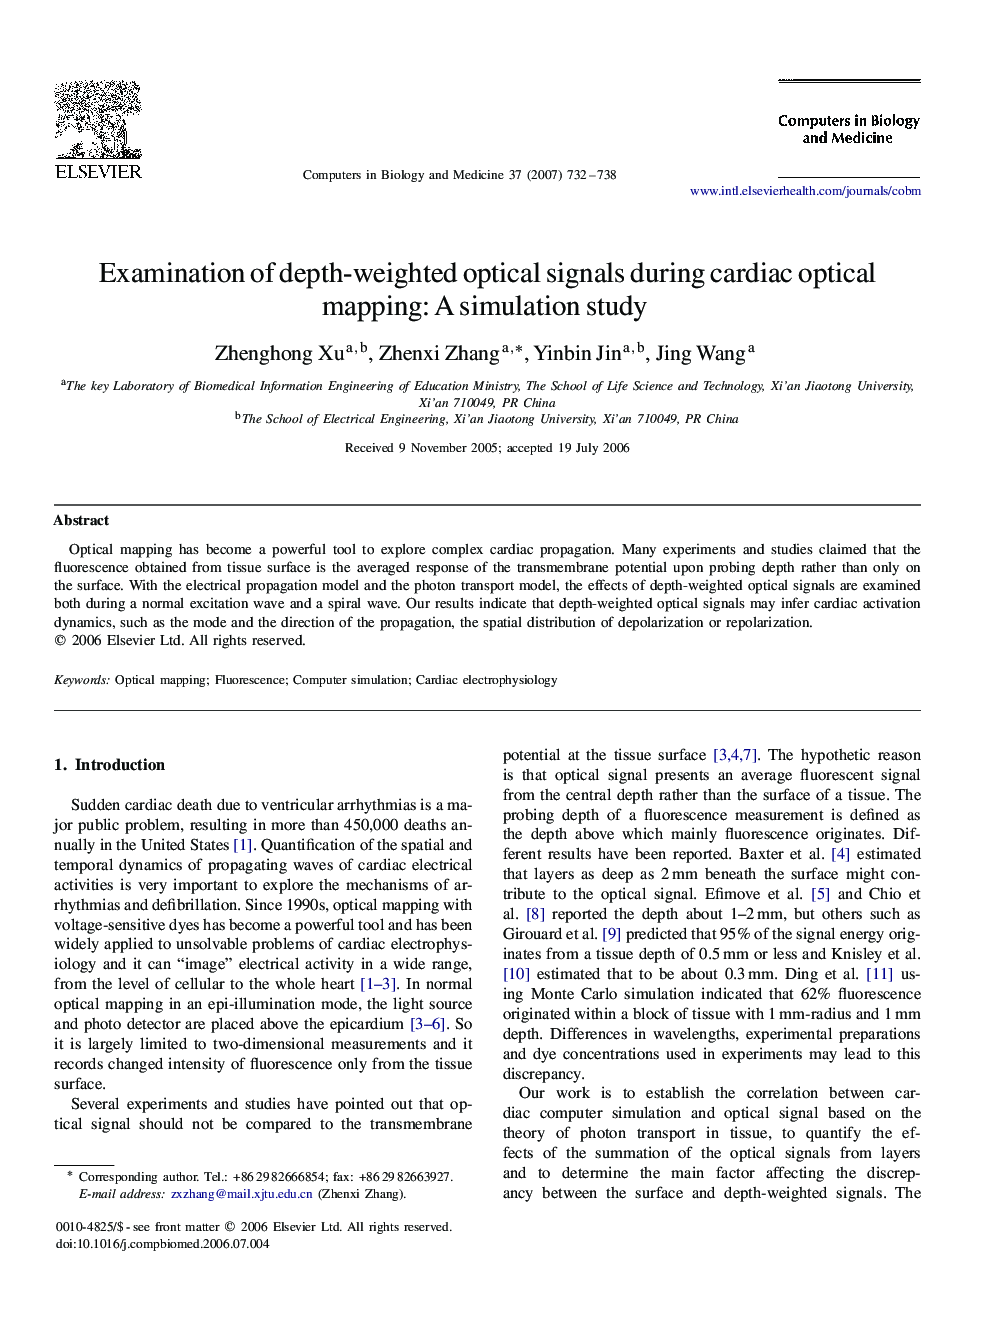 Examination of depth-weighted optical signals during cardiac optical mapping: A simulation study